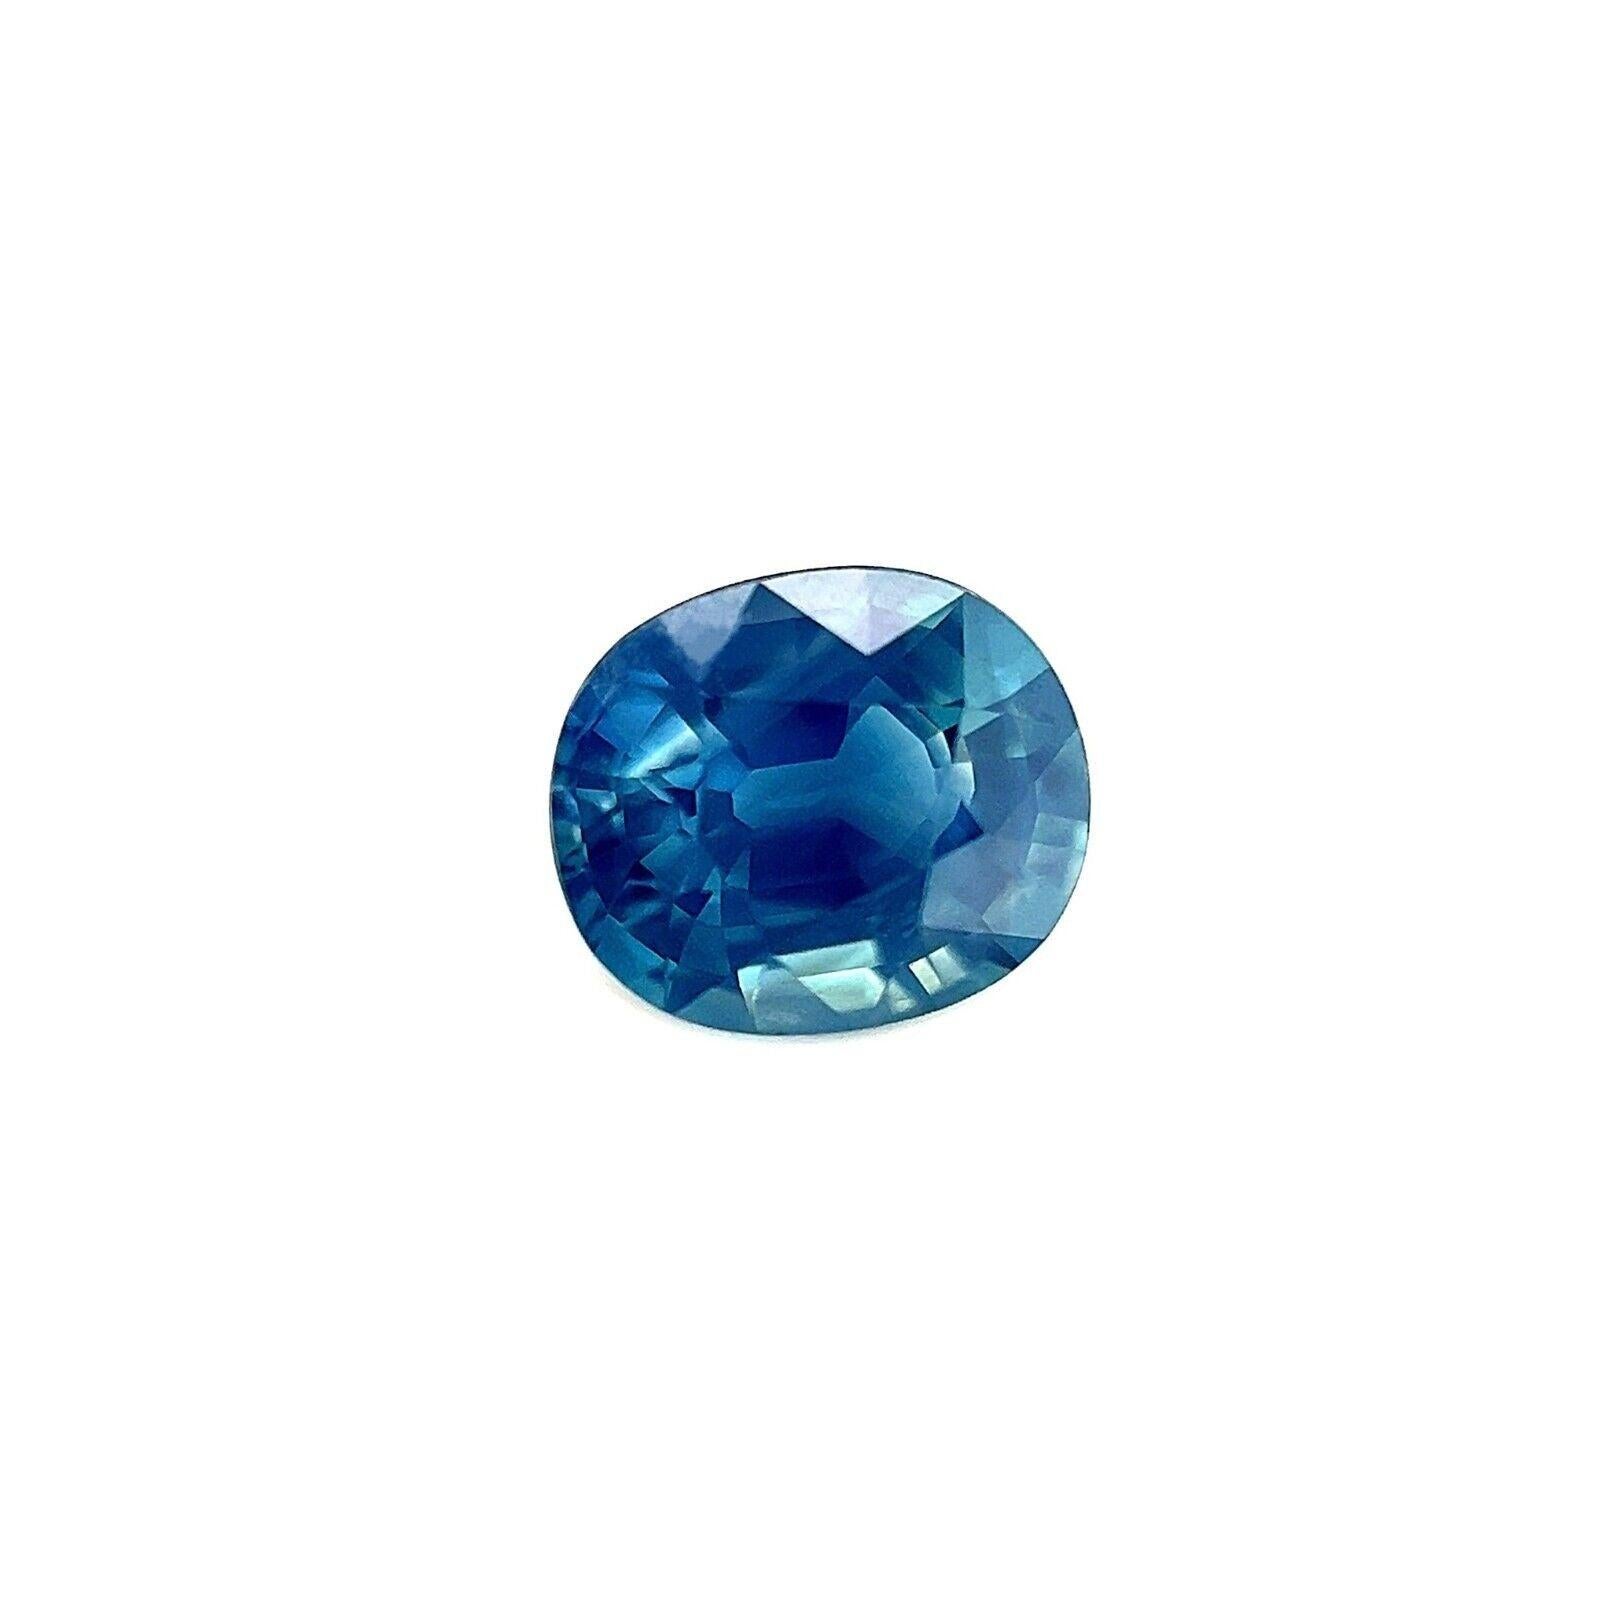 1.02ct Fine Green Blue Sapphire GRA Certified Oval Cut Rare Loose Gem 6.3x5.3mm

GRA Certified Vivid Green Blue Sapphire Gemstone.
1.02 Carat sapphire with a beautiful fine vivid green blue colour. Fully certified by GRA confirming stone as natural.